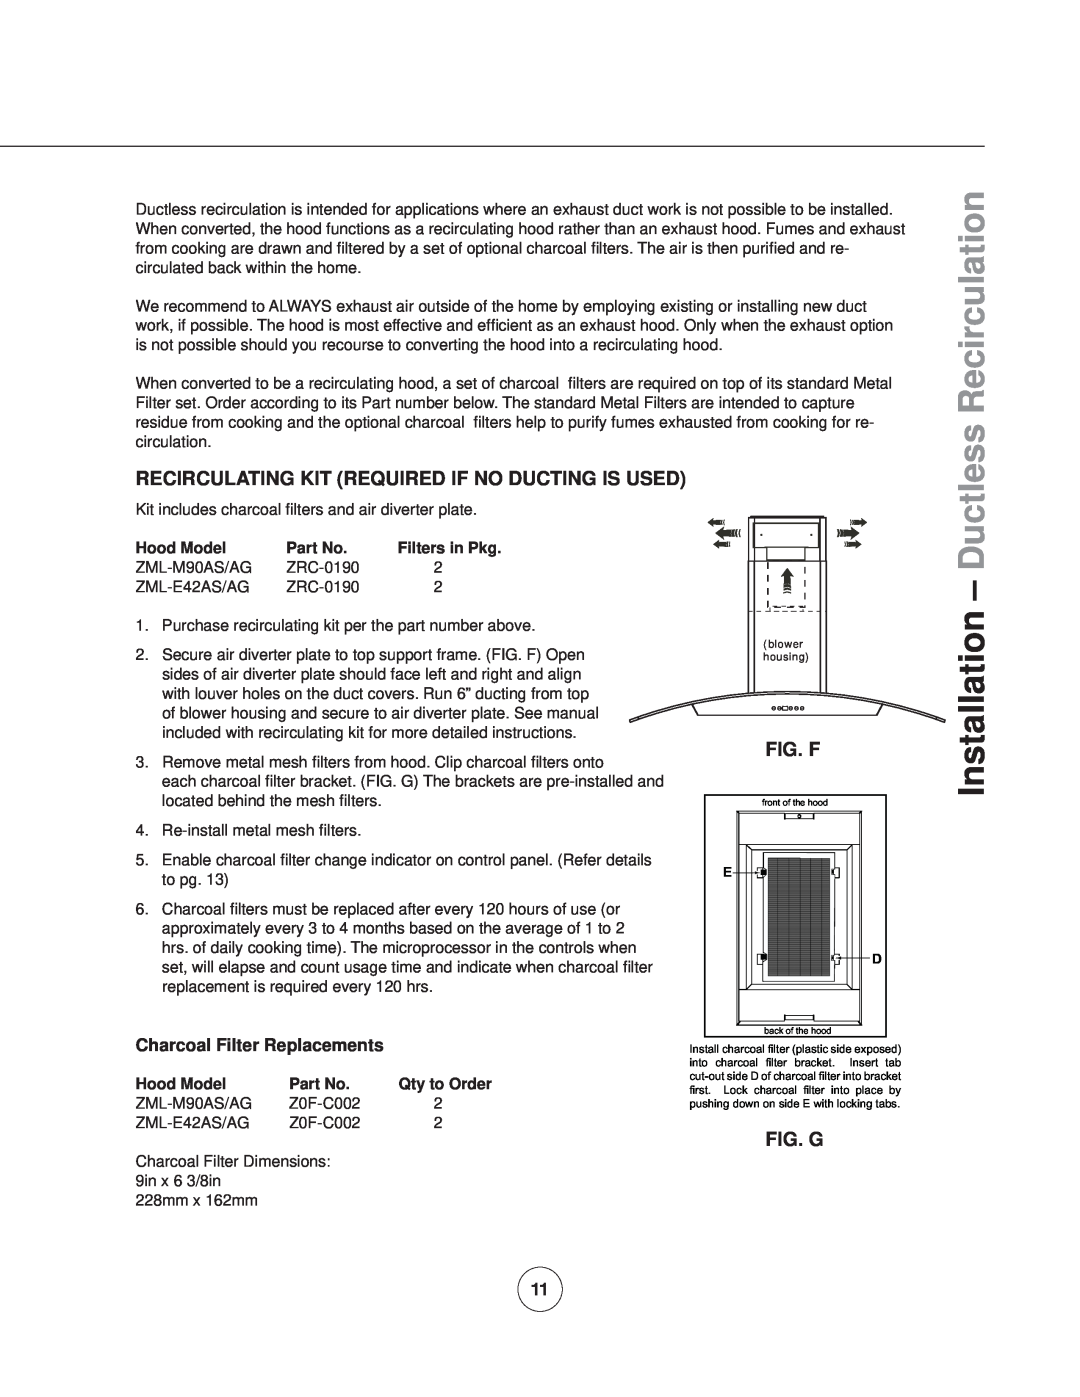 Zephyr ZML-E42AG/AS Ductless Recirculation, Installation, Recirculating Kit Required If No Ducting Is Used, Fig. F, Fig. G 